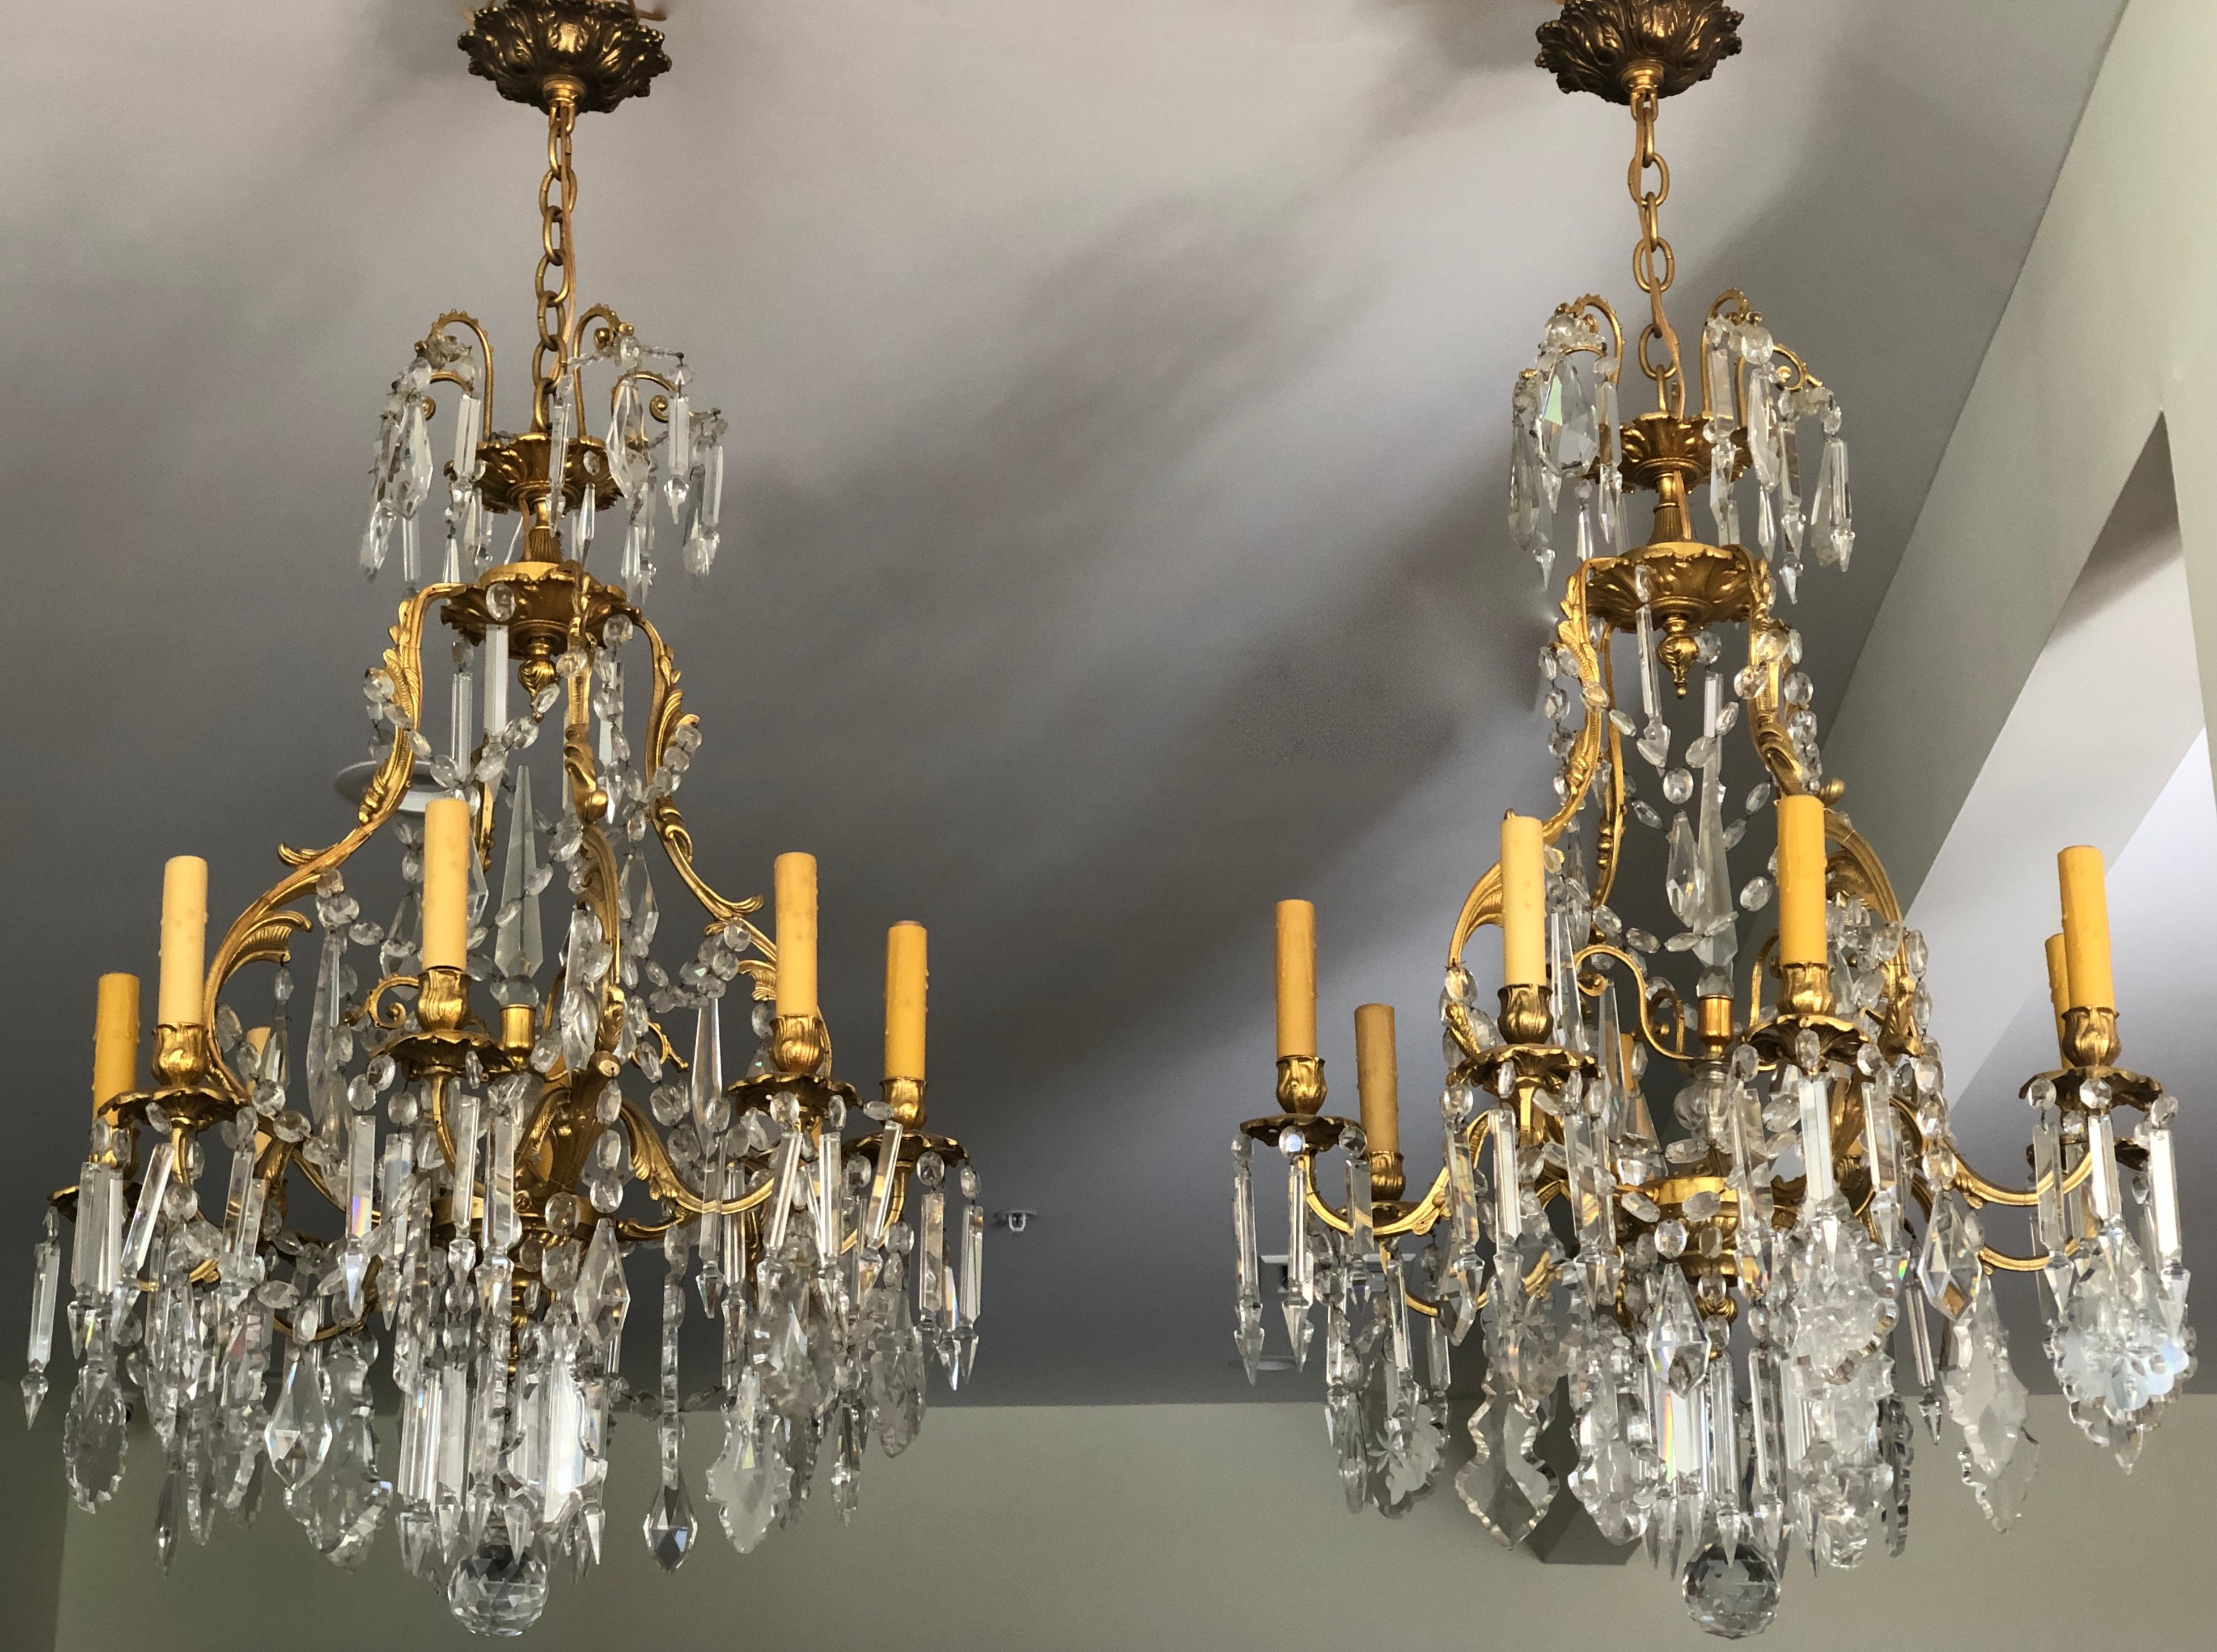 Pair of fine quality French 19th century Louis XV chandeliers. 8 light.
Ormolu bronze and crystal with a Rococo influence. Fine casting and gilding.
Height is for chandelier and canopy. Any amount of chain can be used.